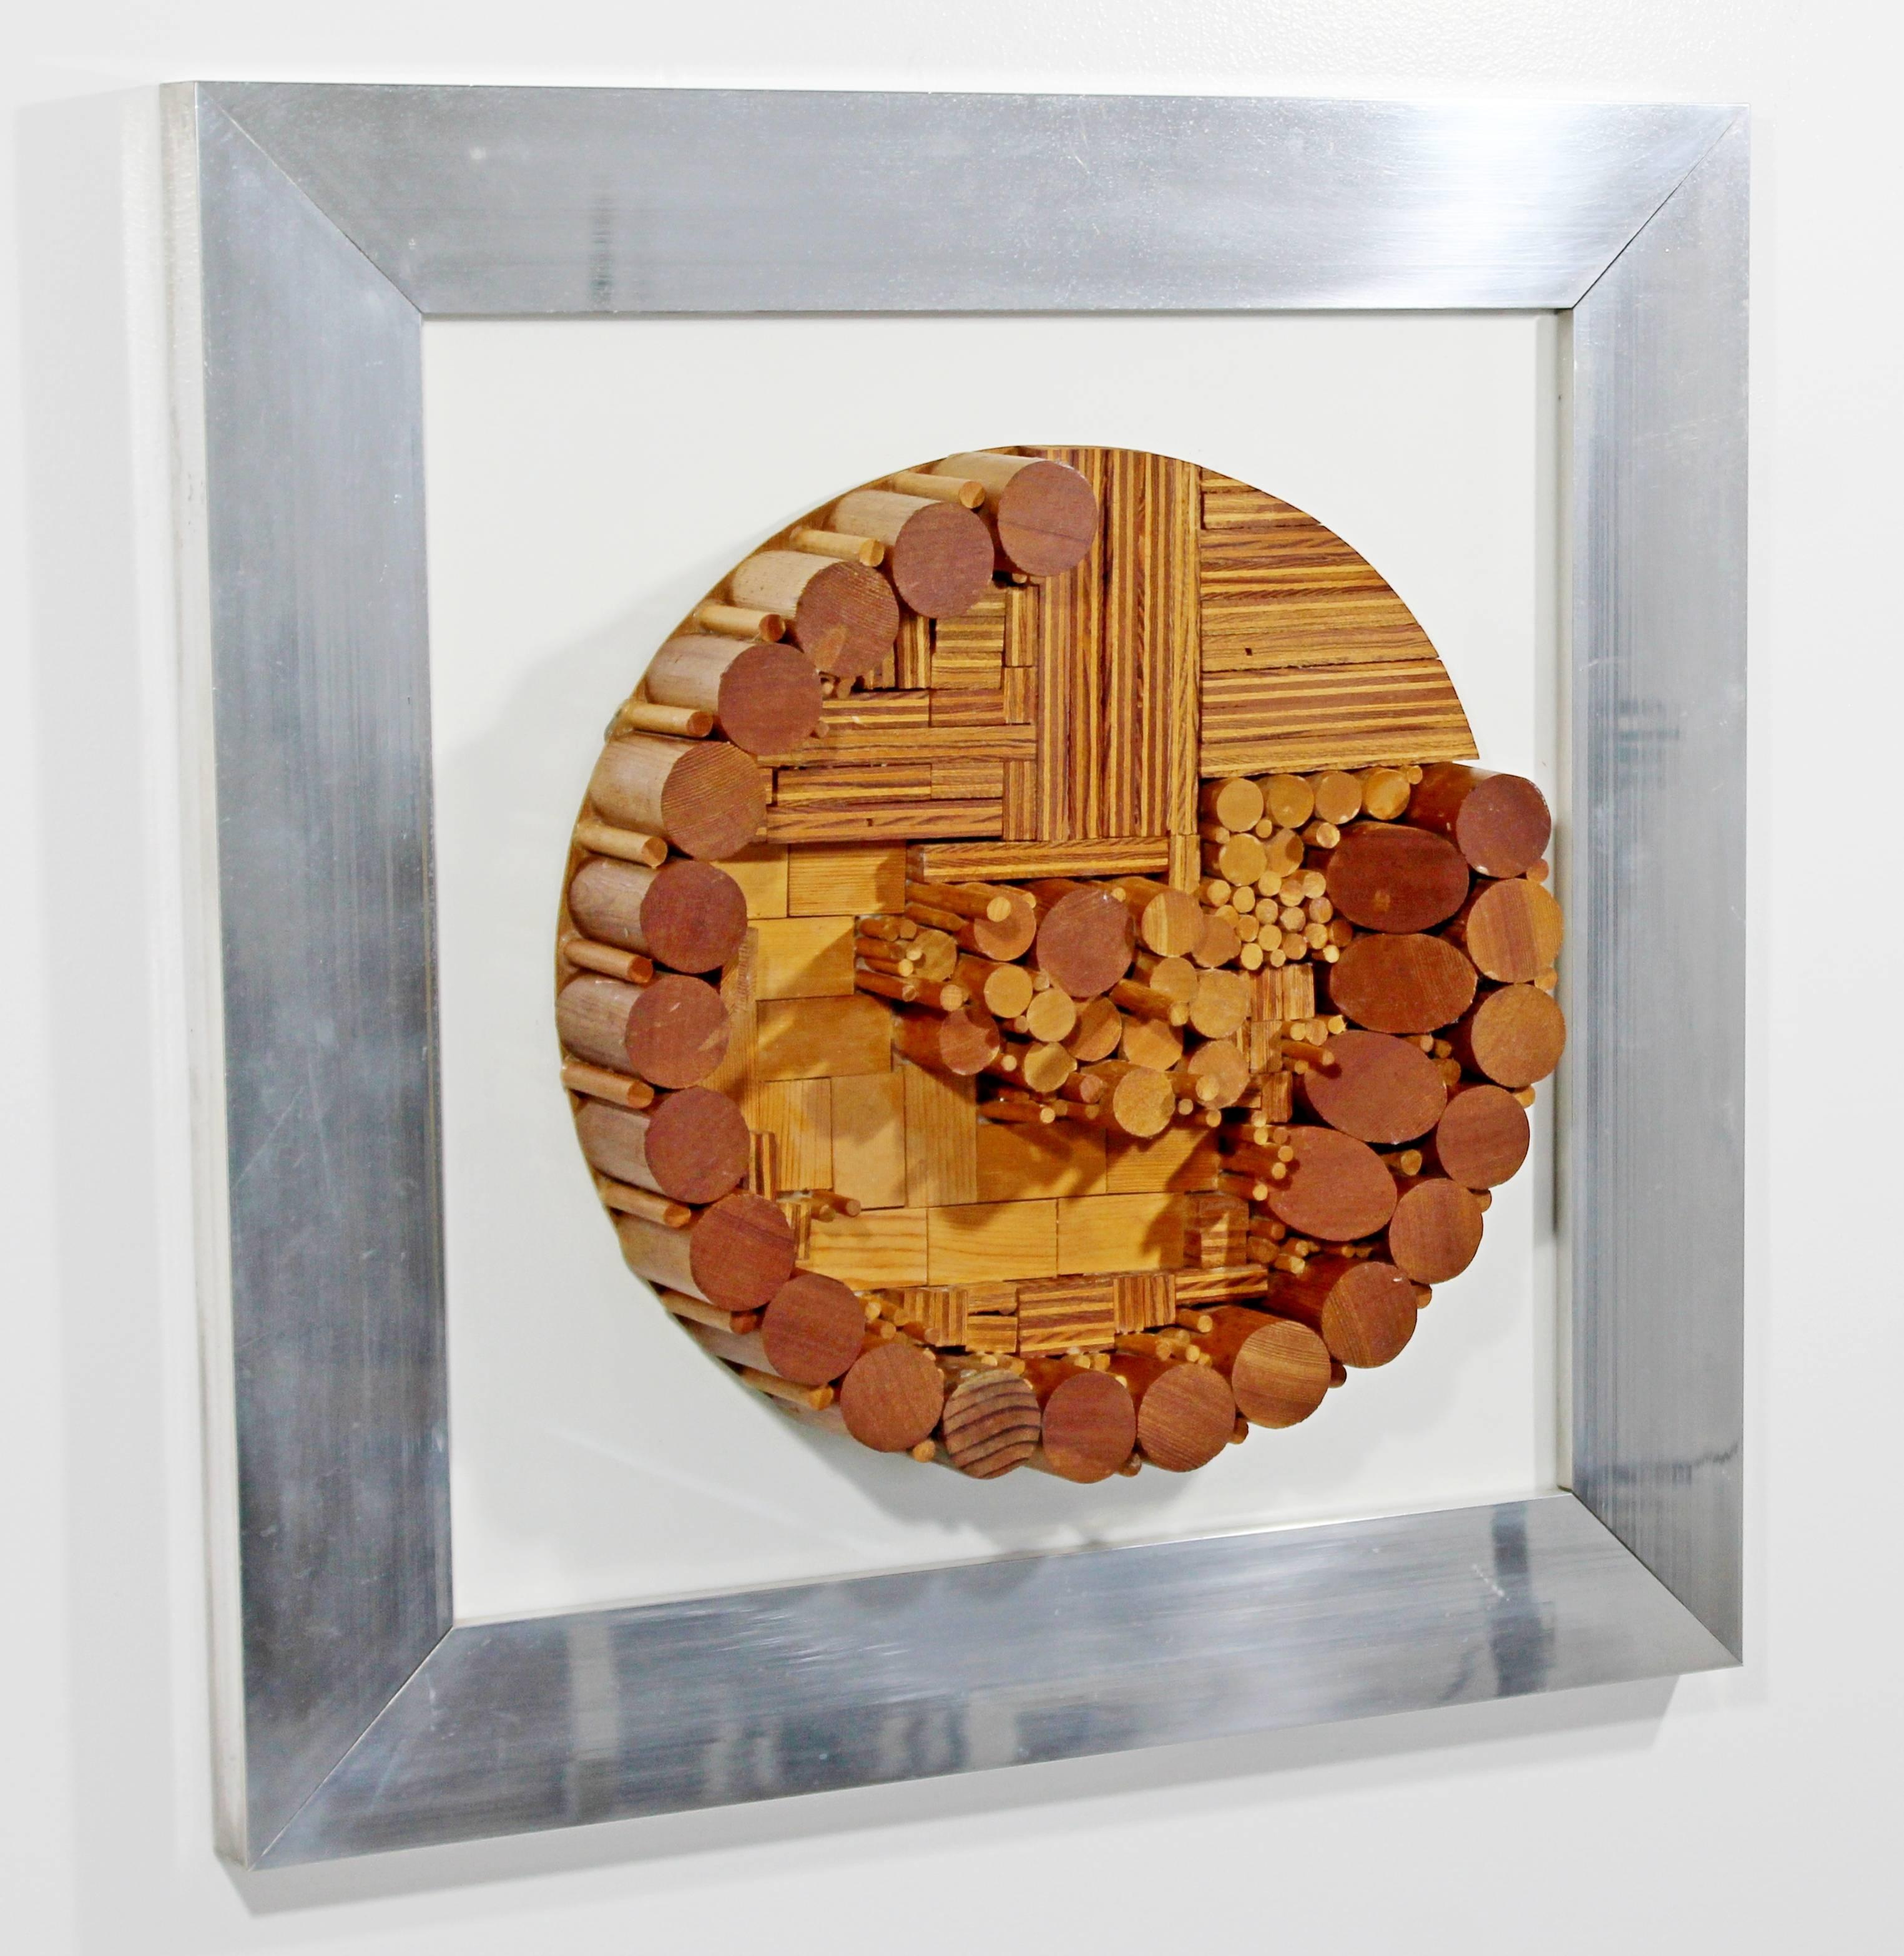 For your consideration is a framed, dynamic, dimensional wood art sculpture by Greg Copeland, circa the 1970s. In excellent condition. The dimensions of the frame are 23.5